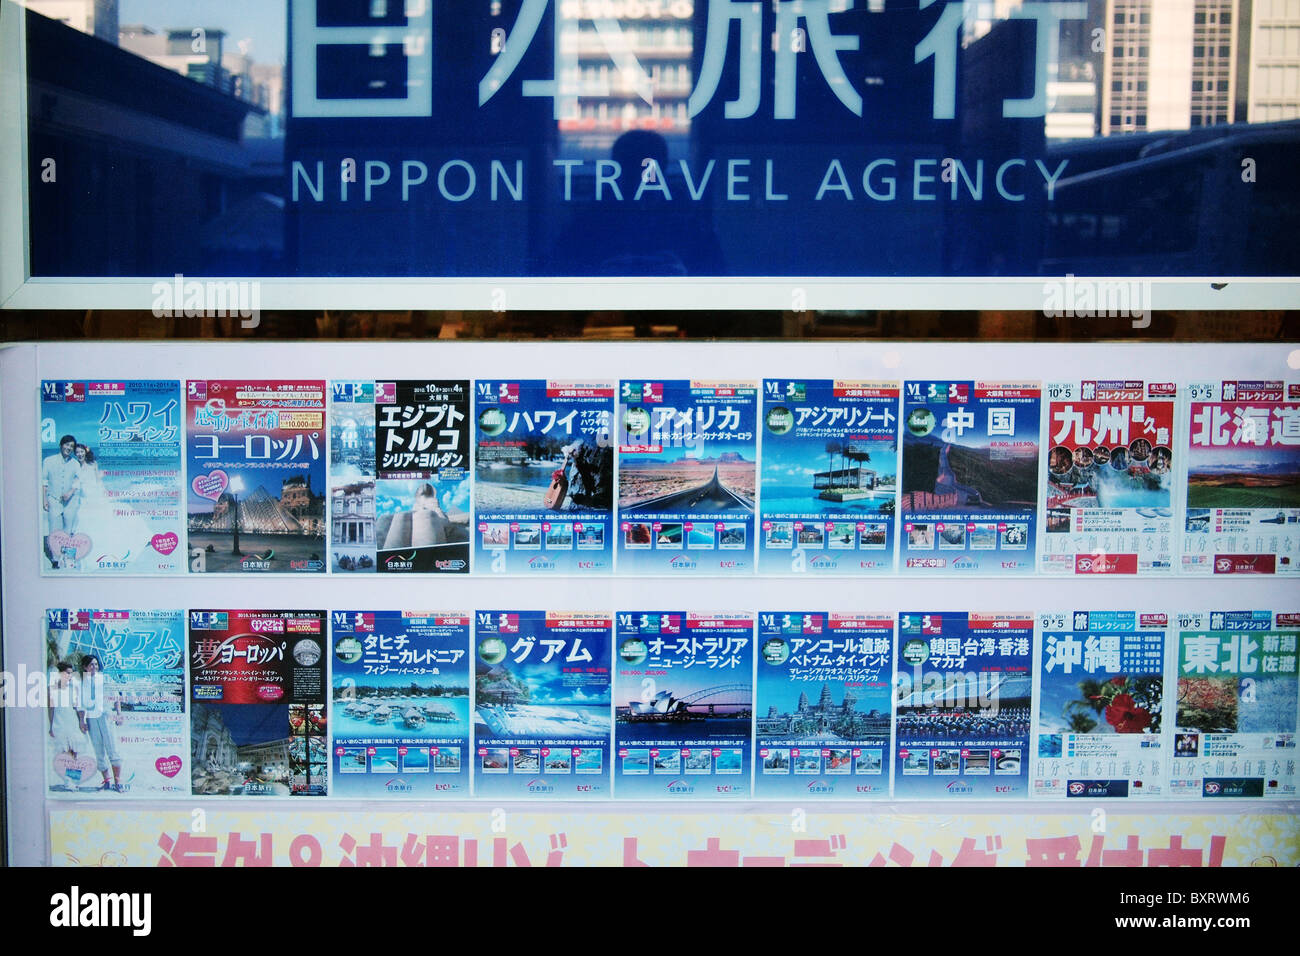 Nippon travel agency tourism holiday poster in Japan Stock Photo